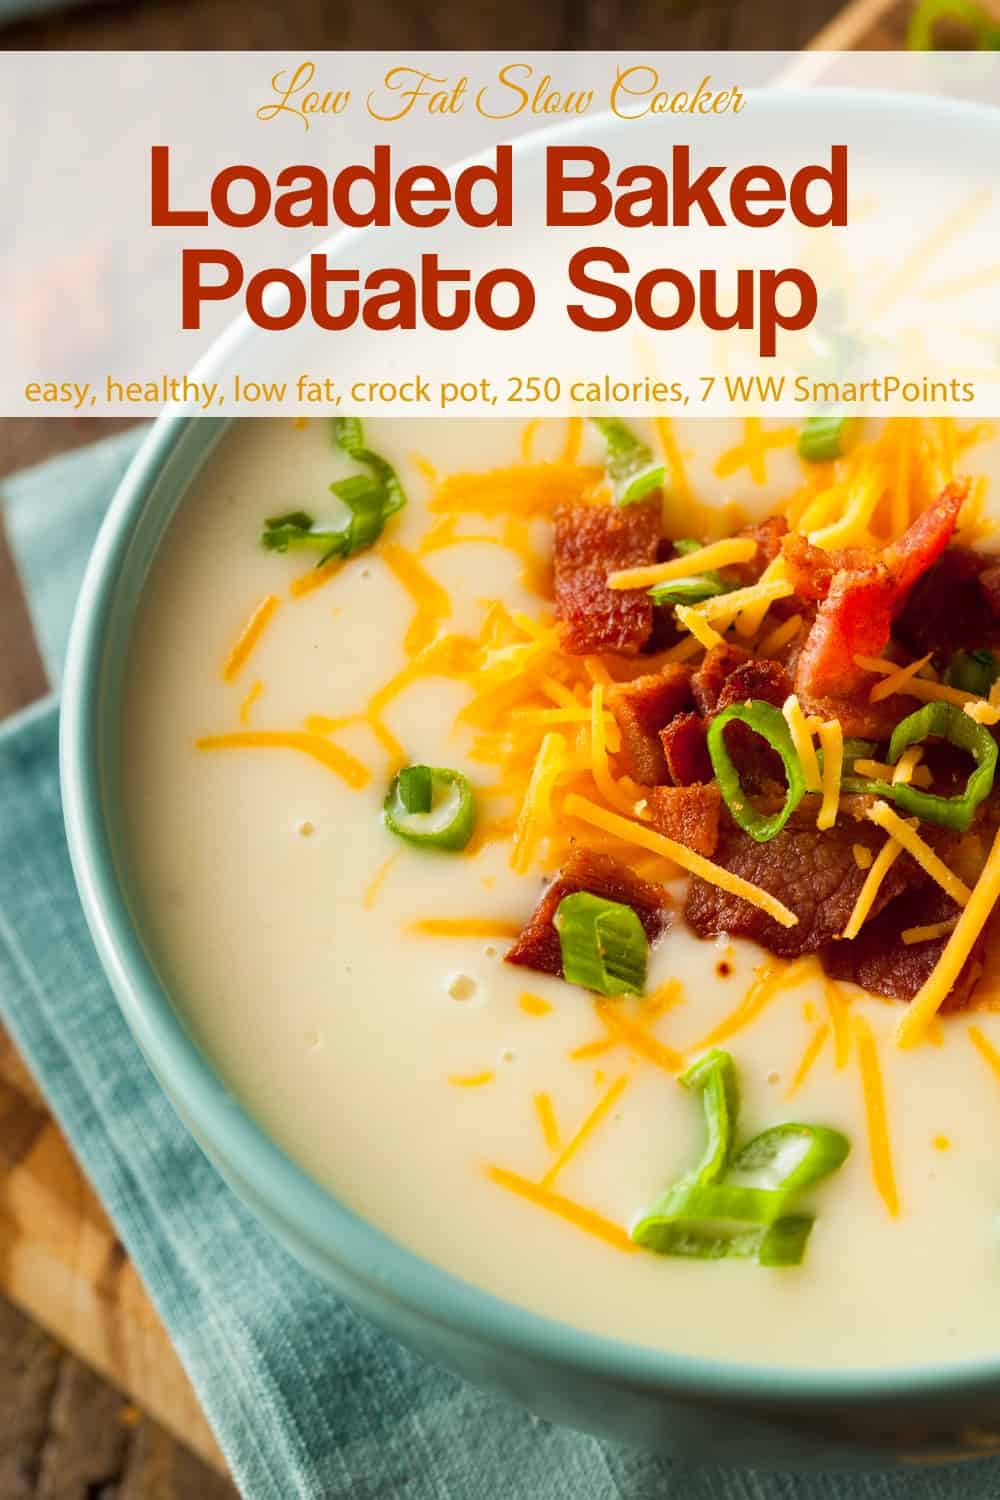 Loaded baked potato soup topped with crispy chopped bacon, sliced green onion and cheddar cheese in blue bowl.